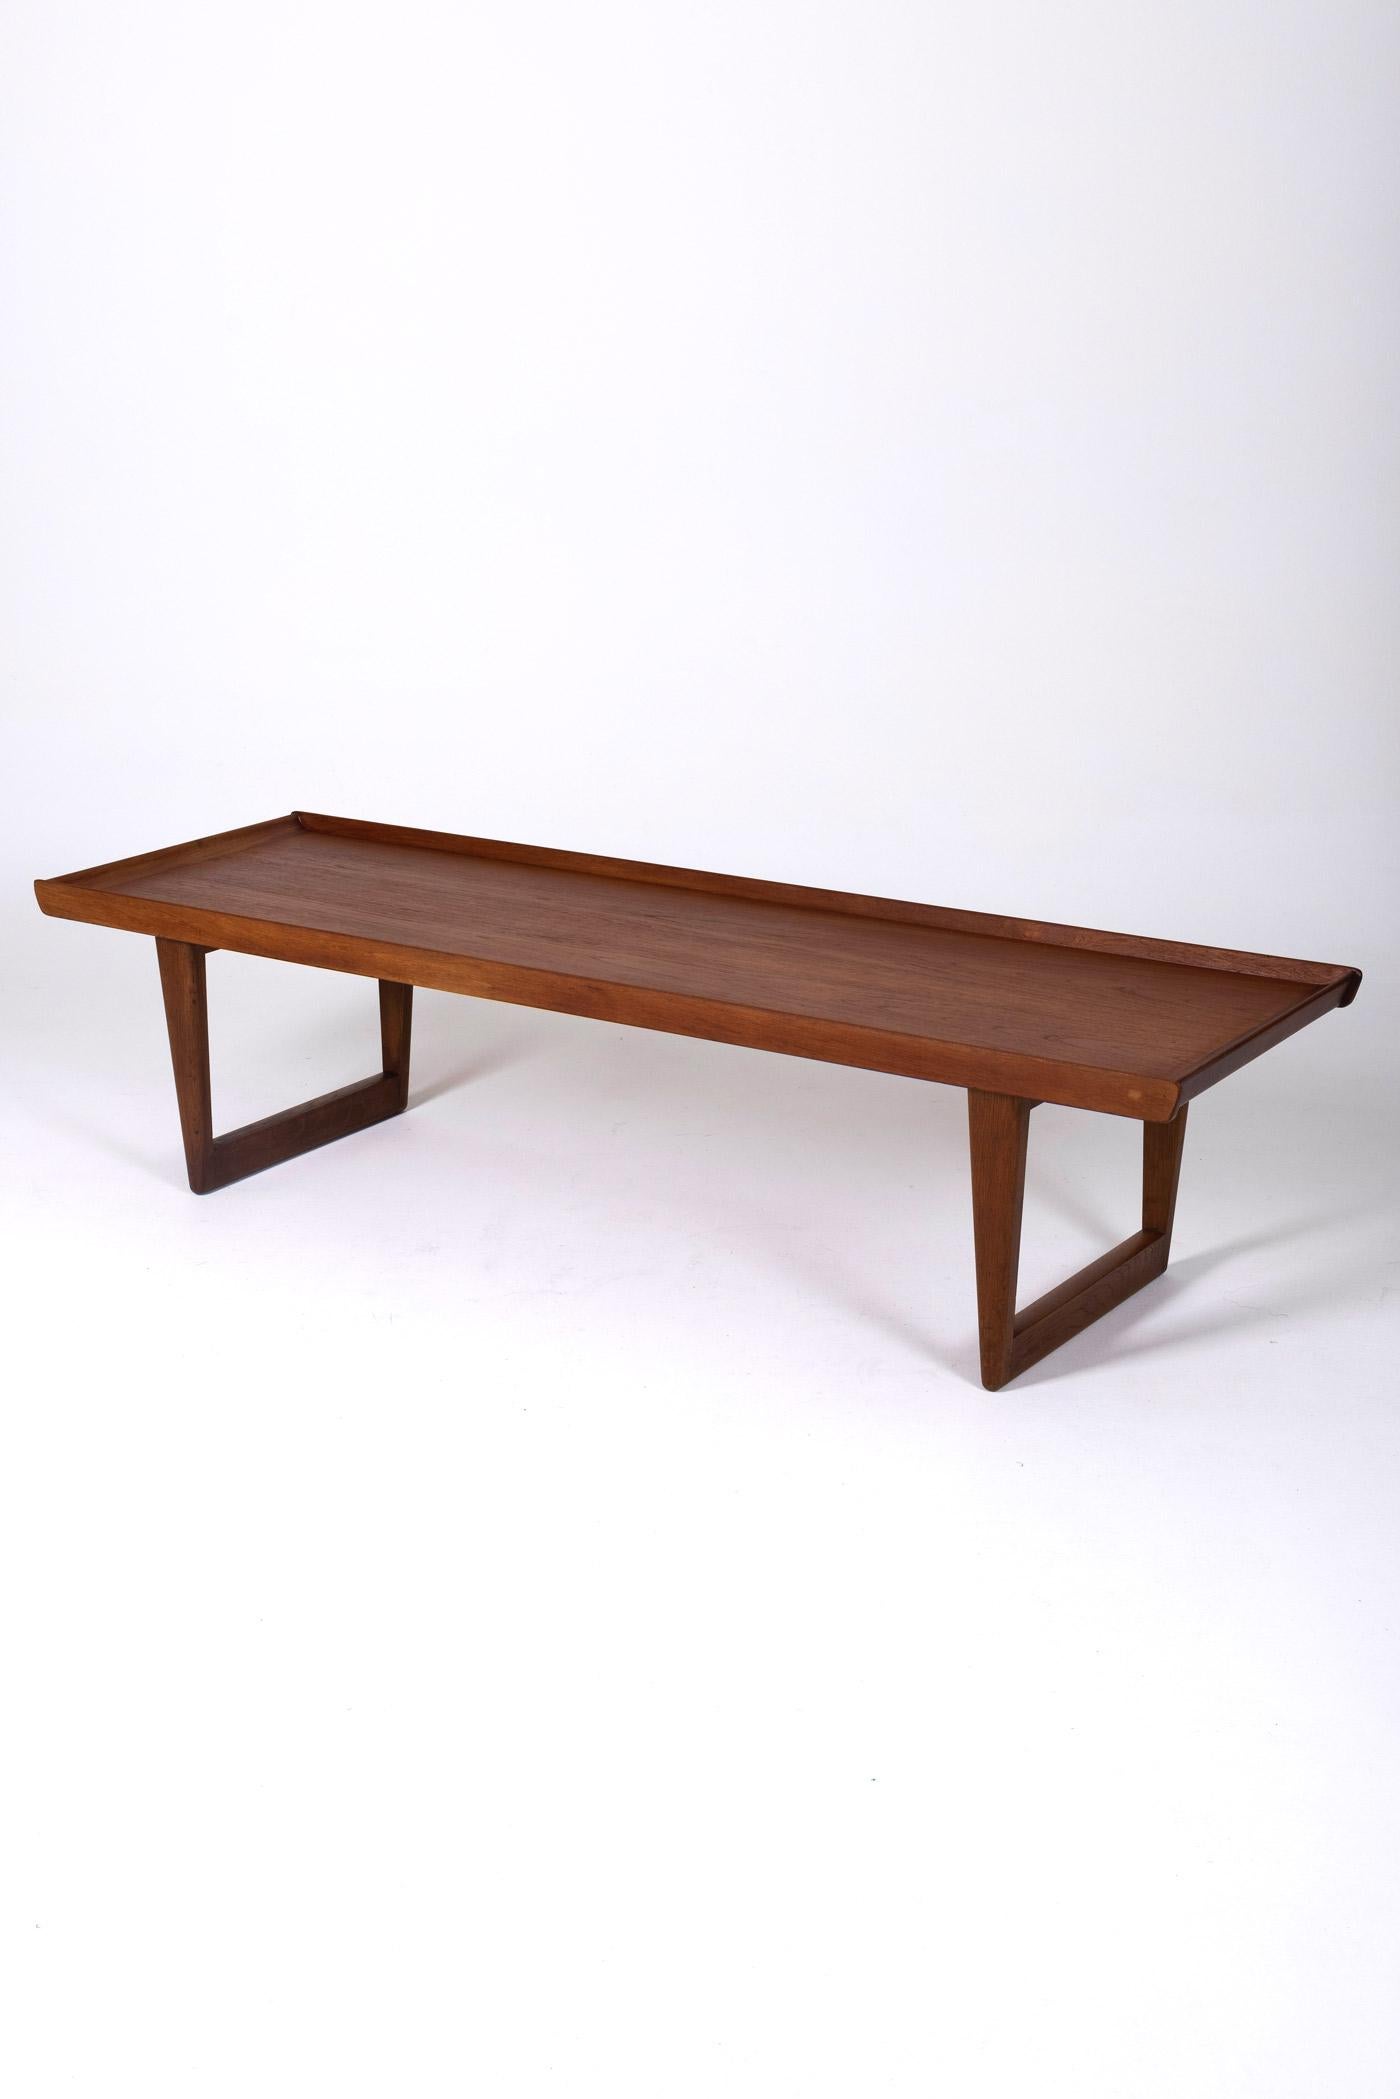 Wooden coffee table attributed to the Danish designer Børge Mogensen, from the 1950s. This coffee table or side table features a solid teak top and base. It is in perfect condition.
DV154